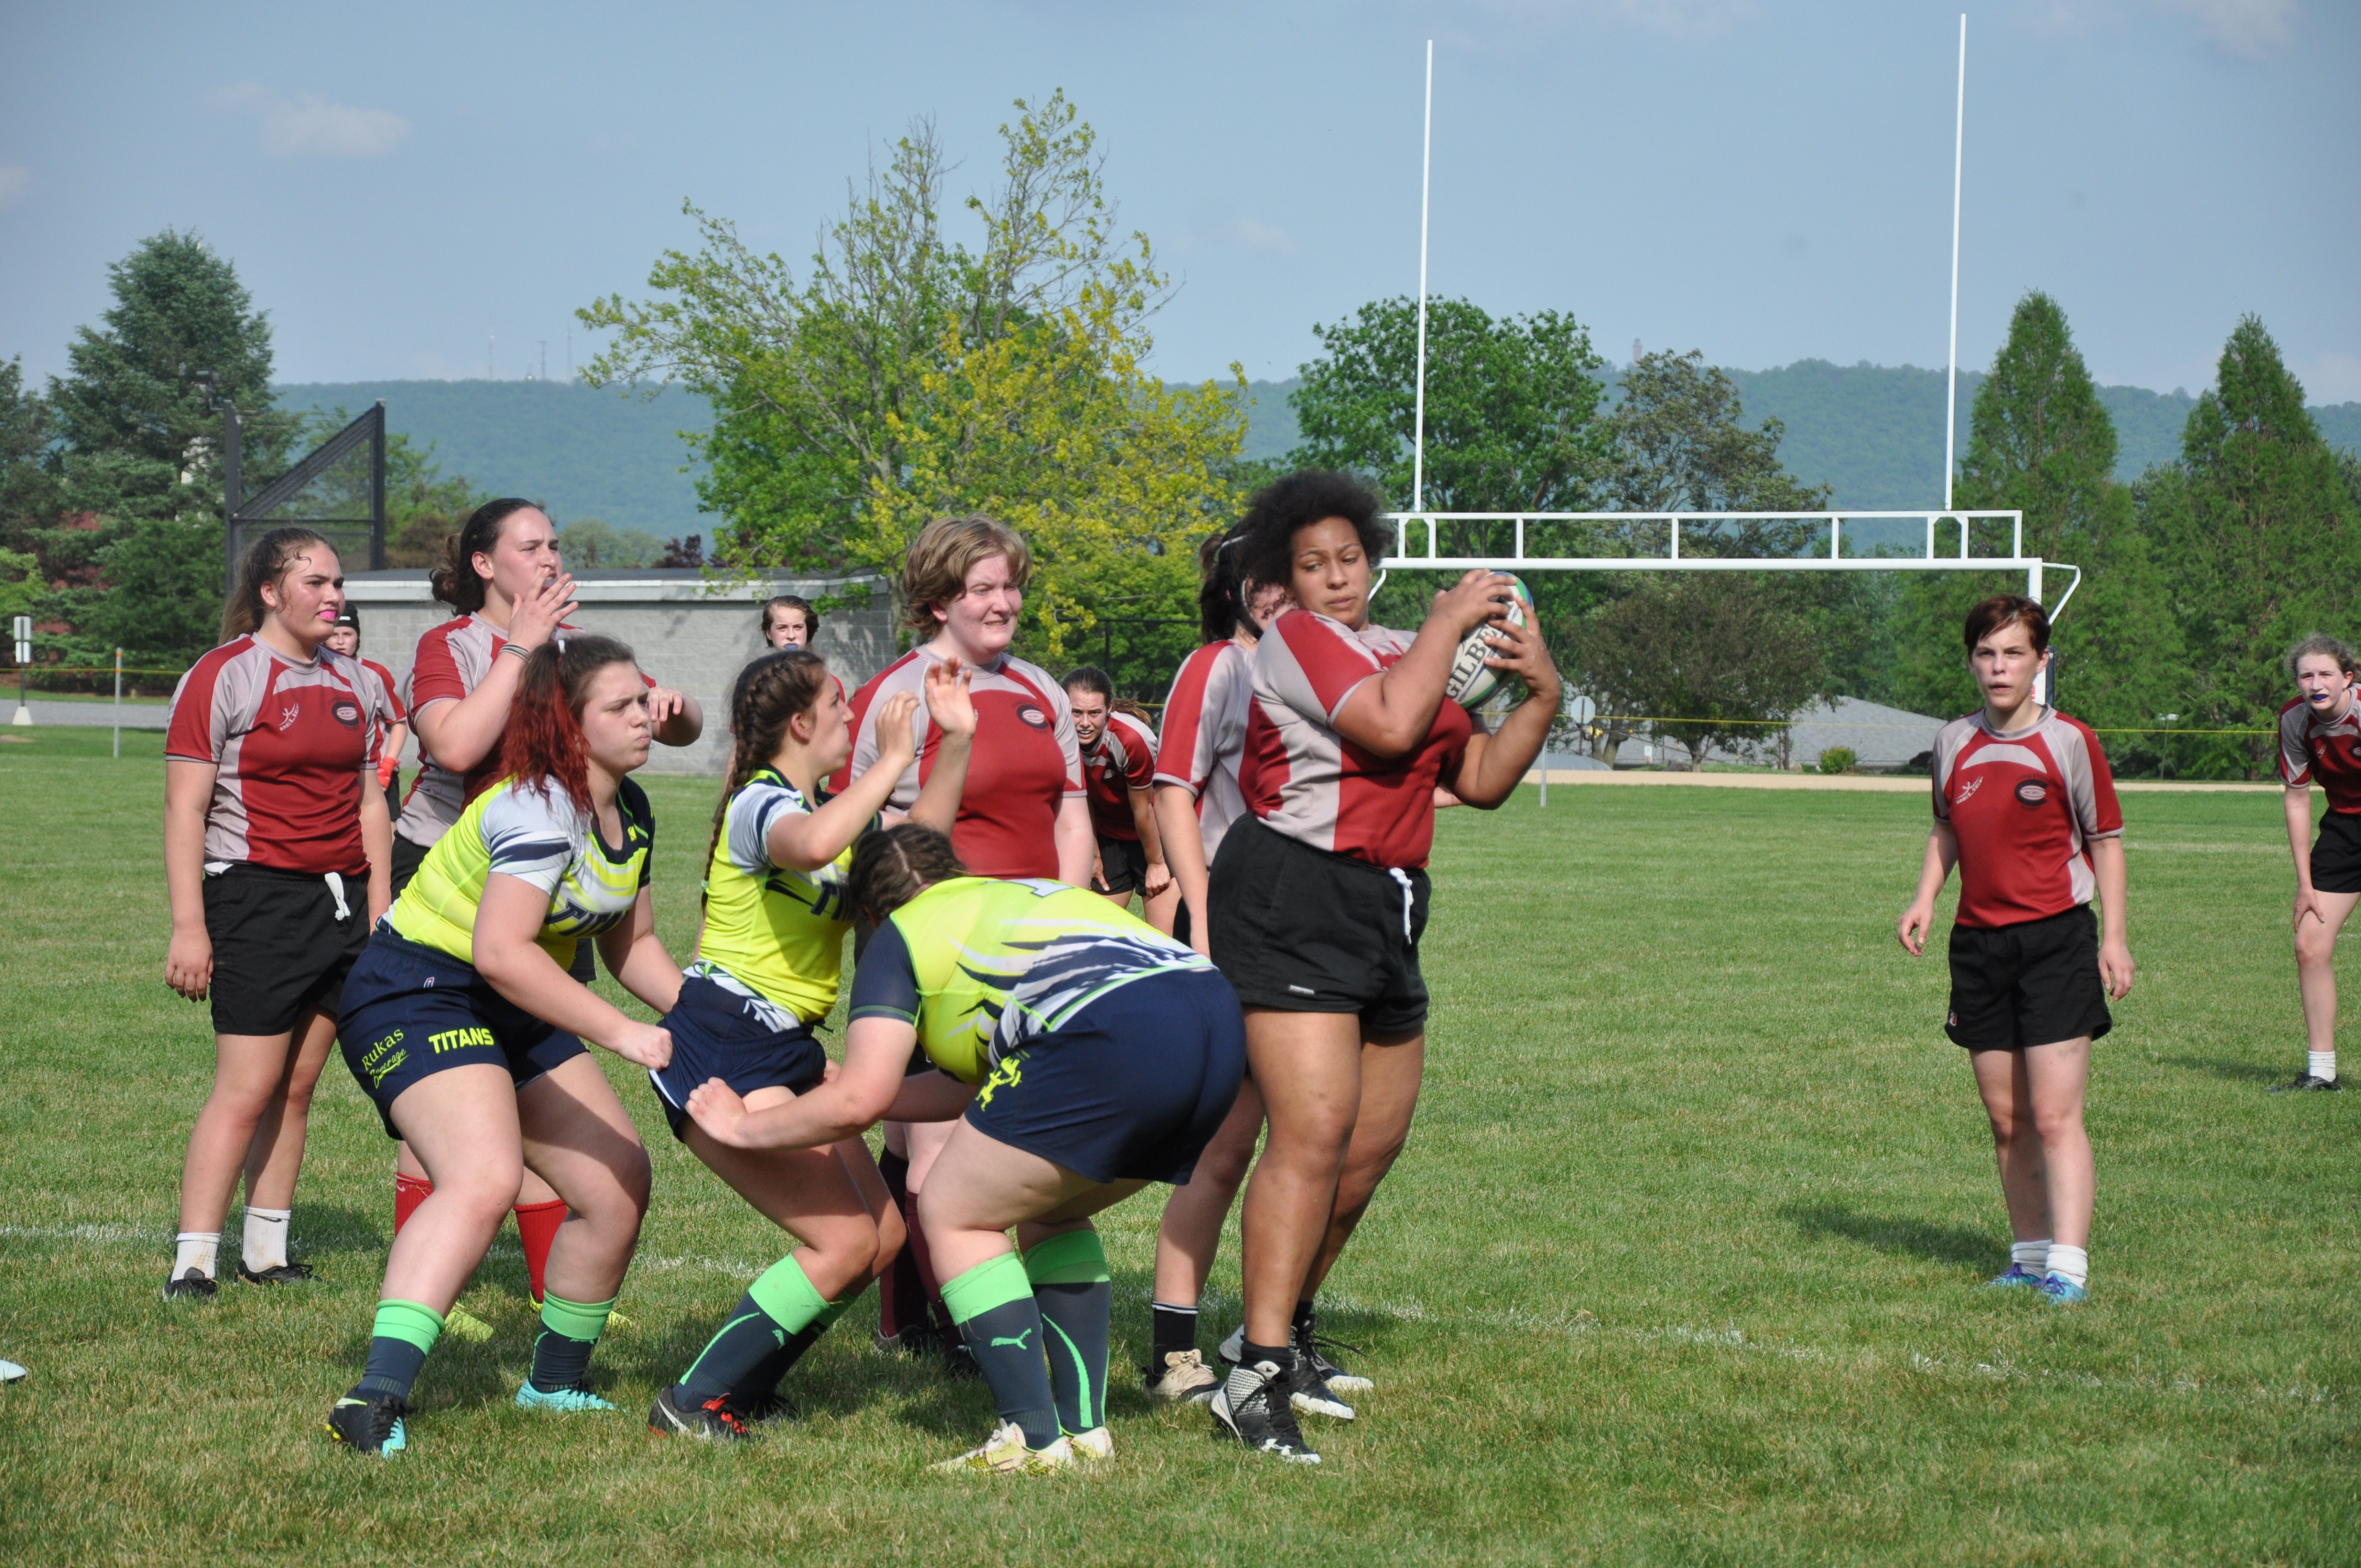 Girls rugby team plays at State Championship Final